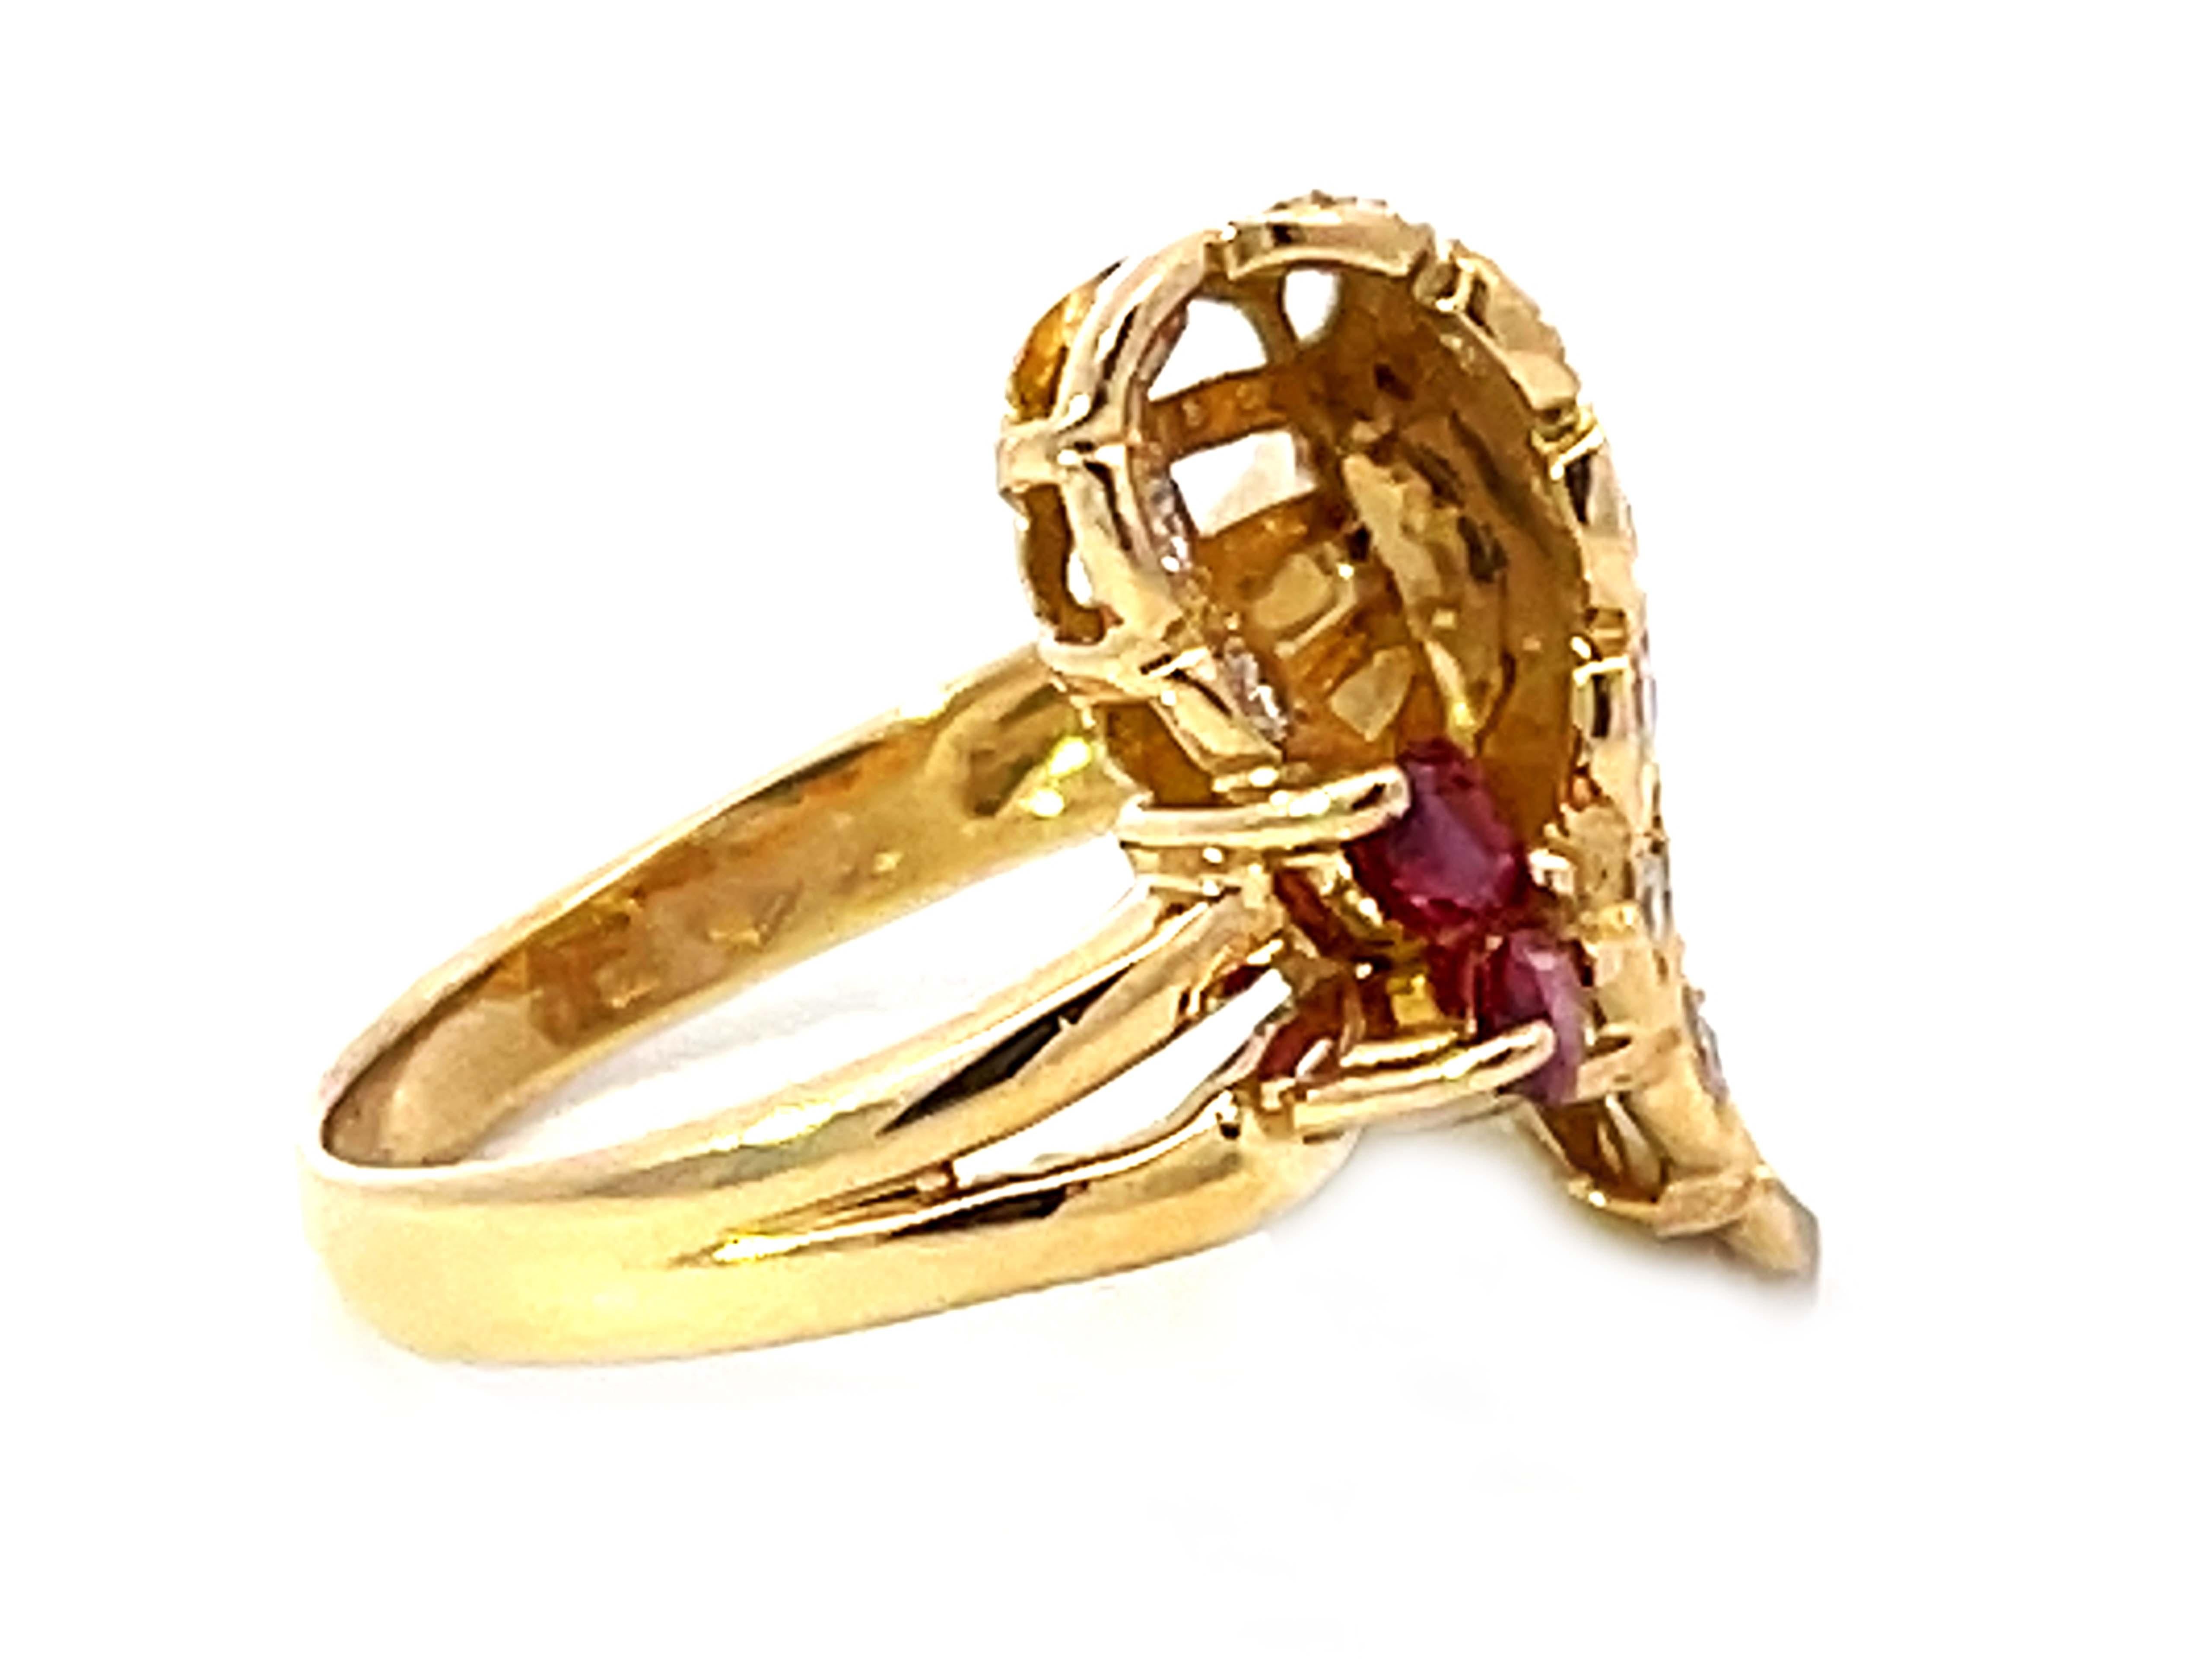 Marquise Red Ruby Diamond Cocktail Ring Solid 18k Yellow Gold In Excellent Condition For Sale In Honolulu, HI